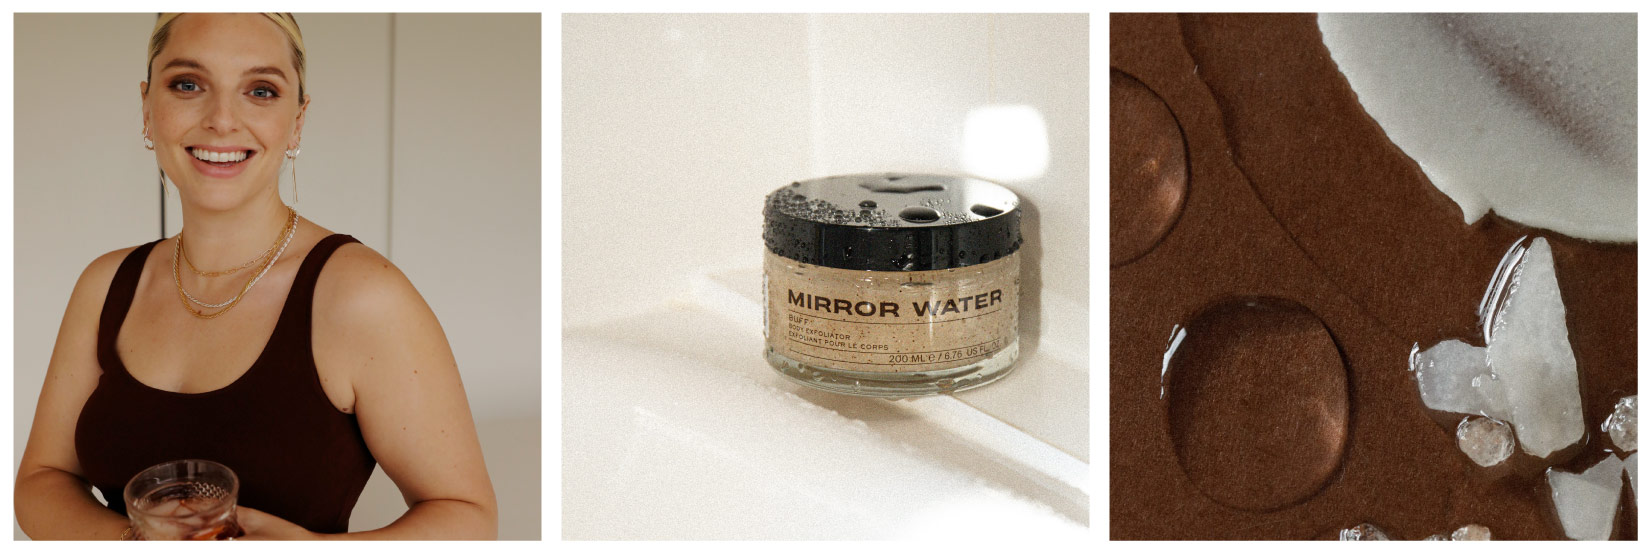 Series Of 3 Images of Estée Lalonde and Mirror Water Products